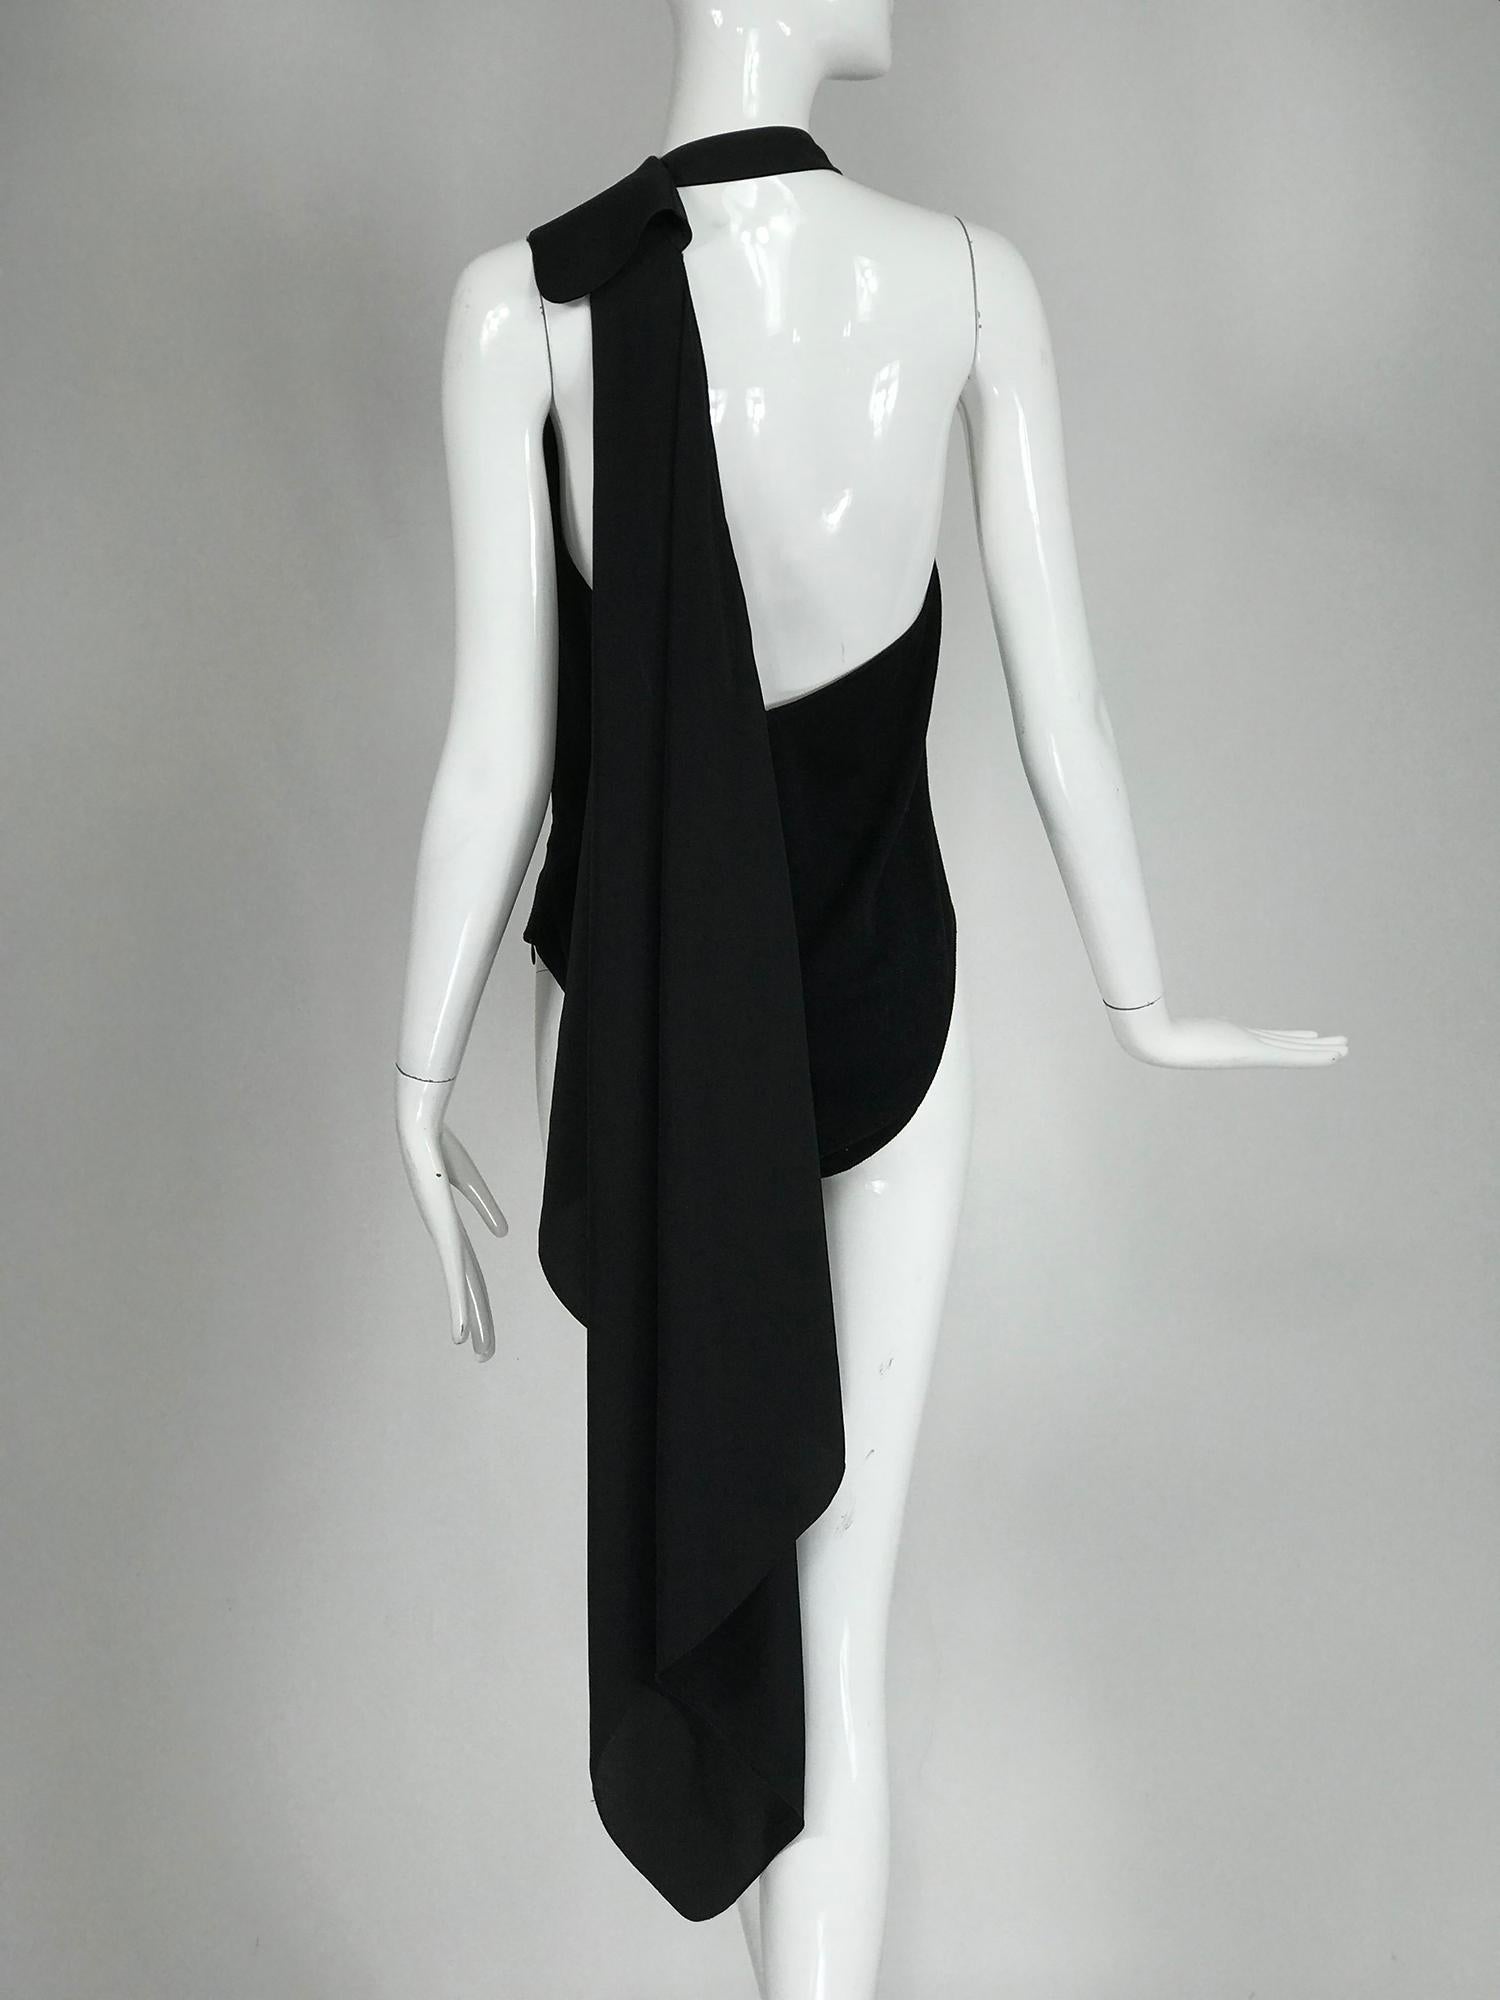 Gianfranco Ferre Black Silk and Sweater Knit Body Suit and Wrap or Drape 1980s For Sale 6